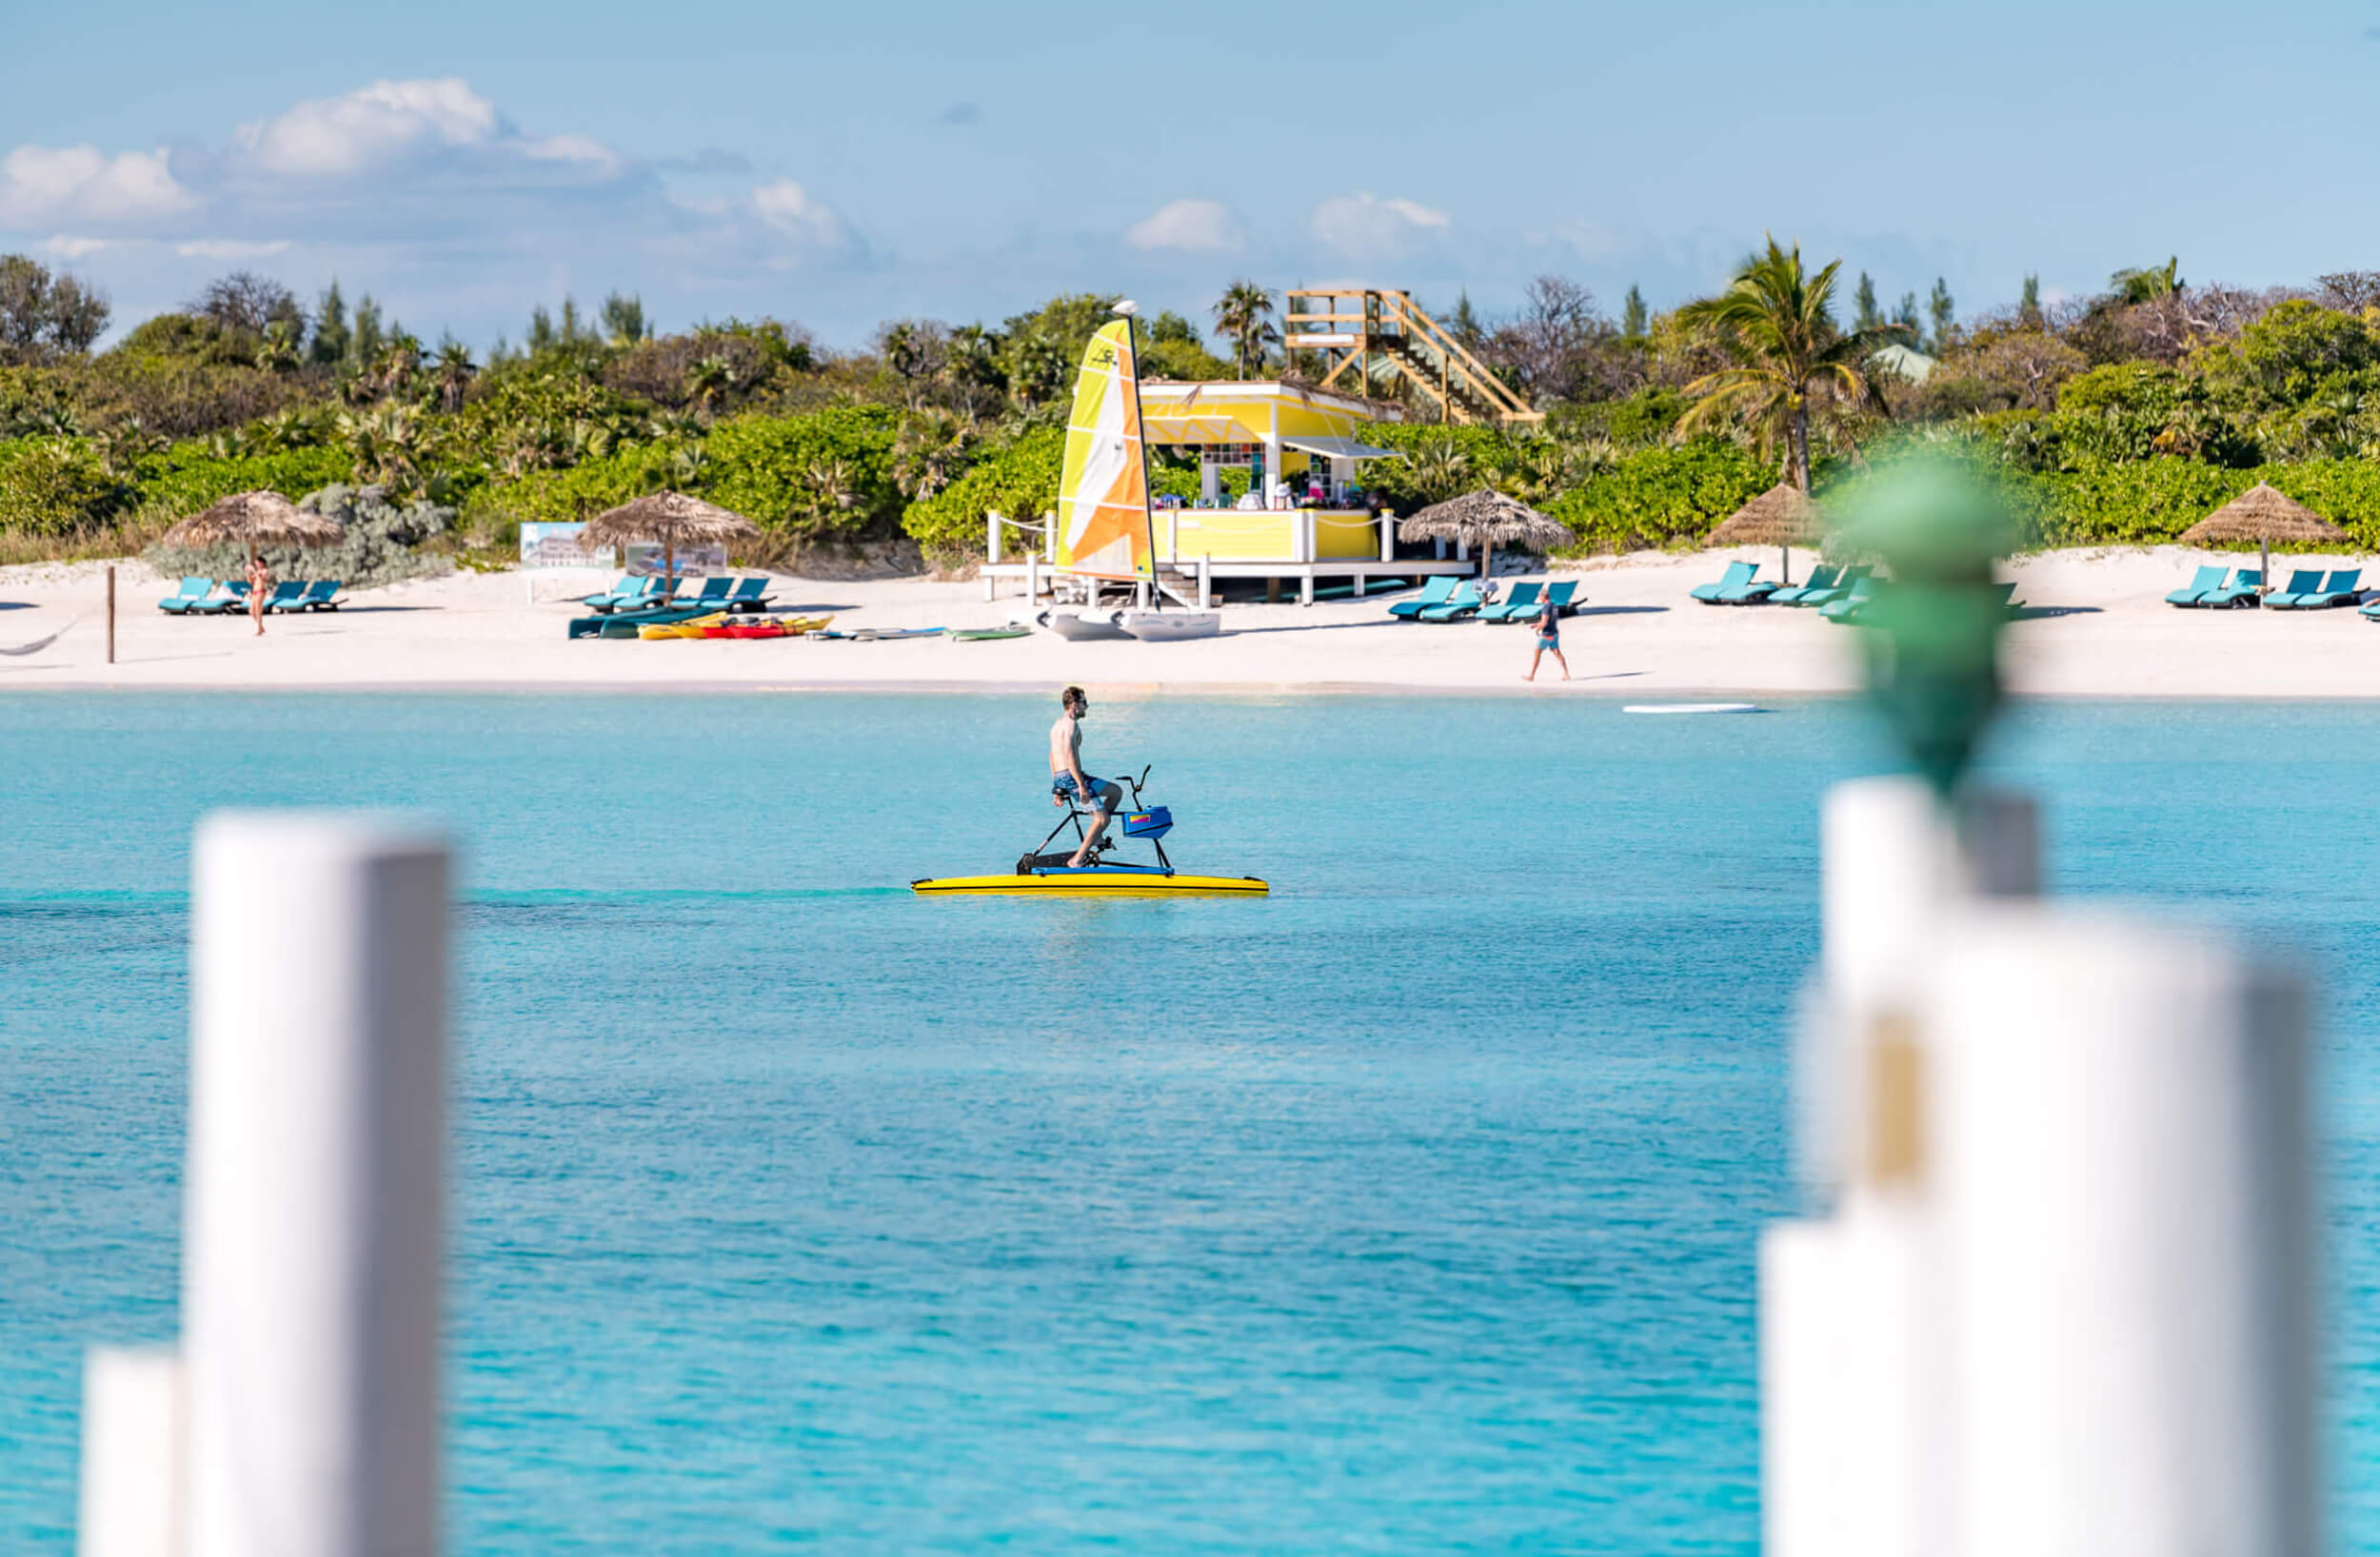 A person Aqua Cycling at The Abaco Club